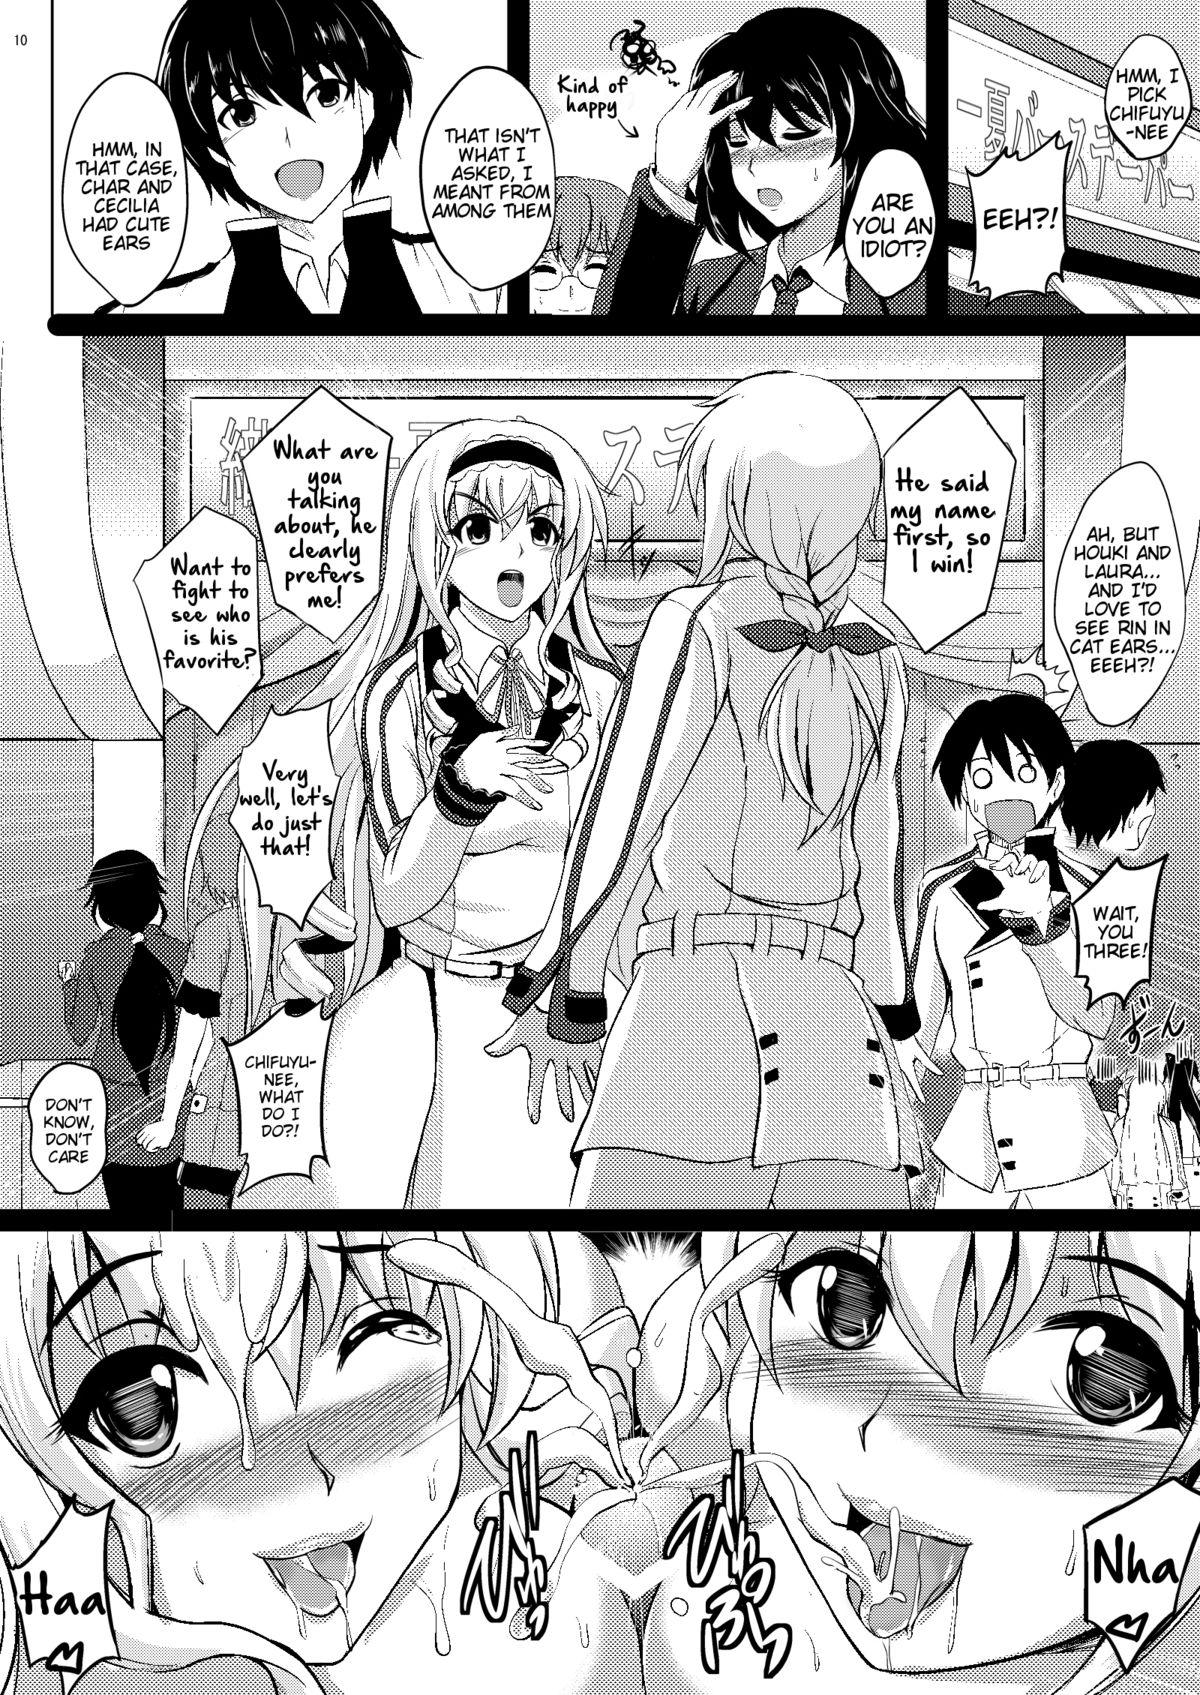 Piercing Poodle & Bunny Time - Infinite stratos Defloration - Page 10